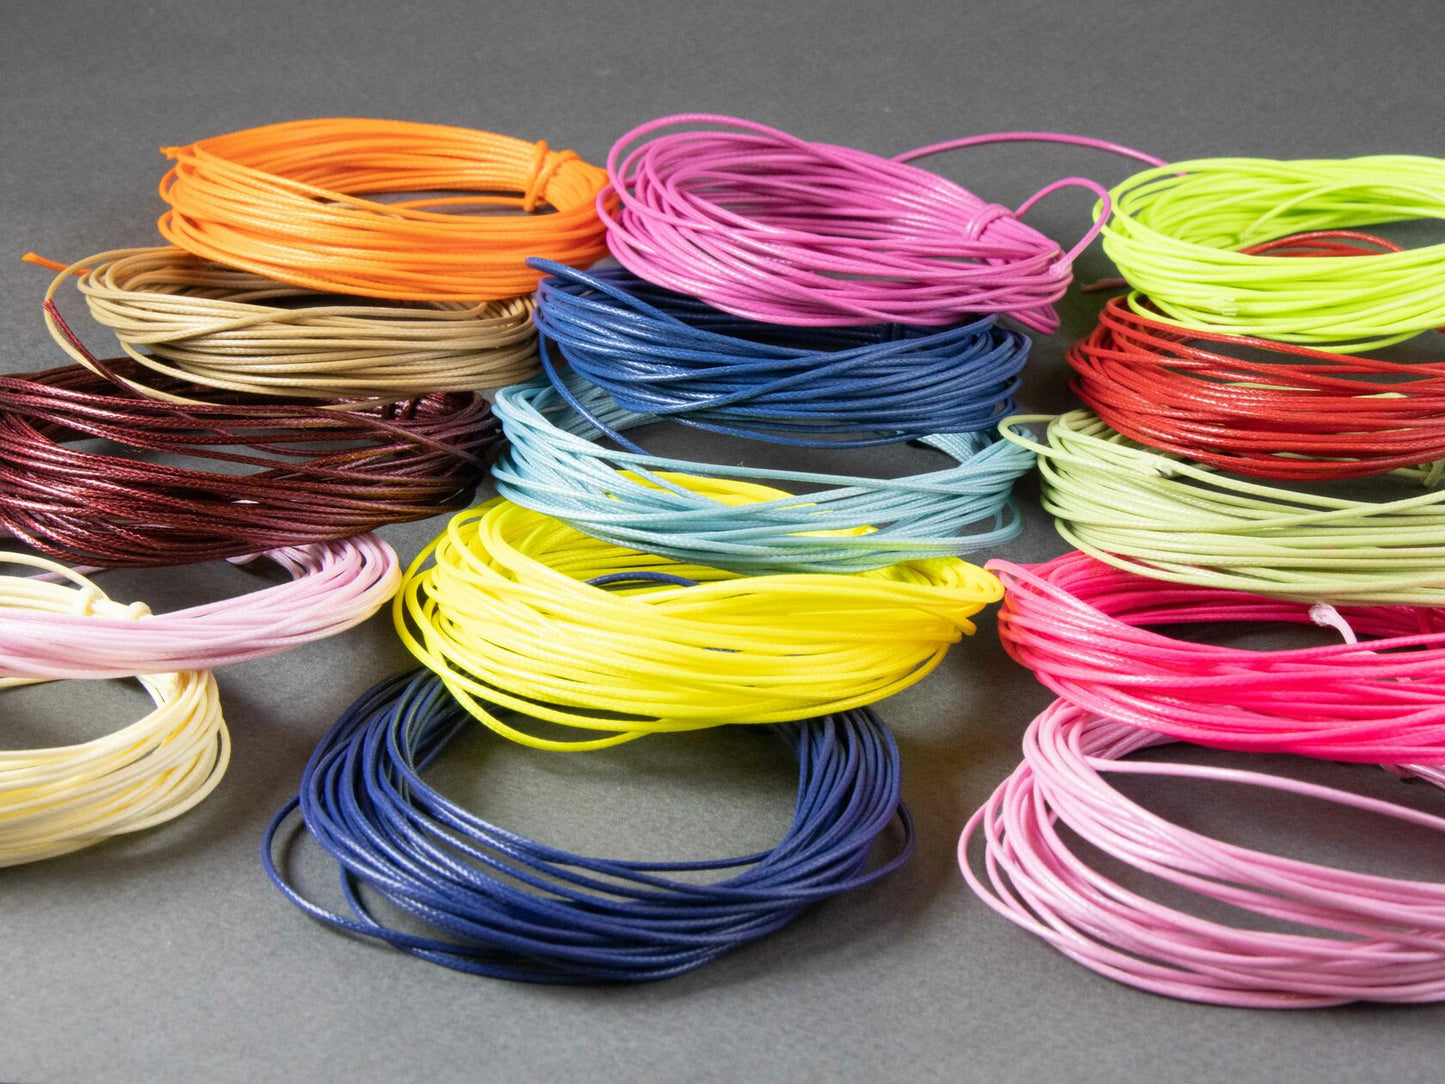 Waxed Polyester Cord in Light Pink